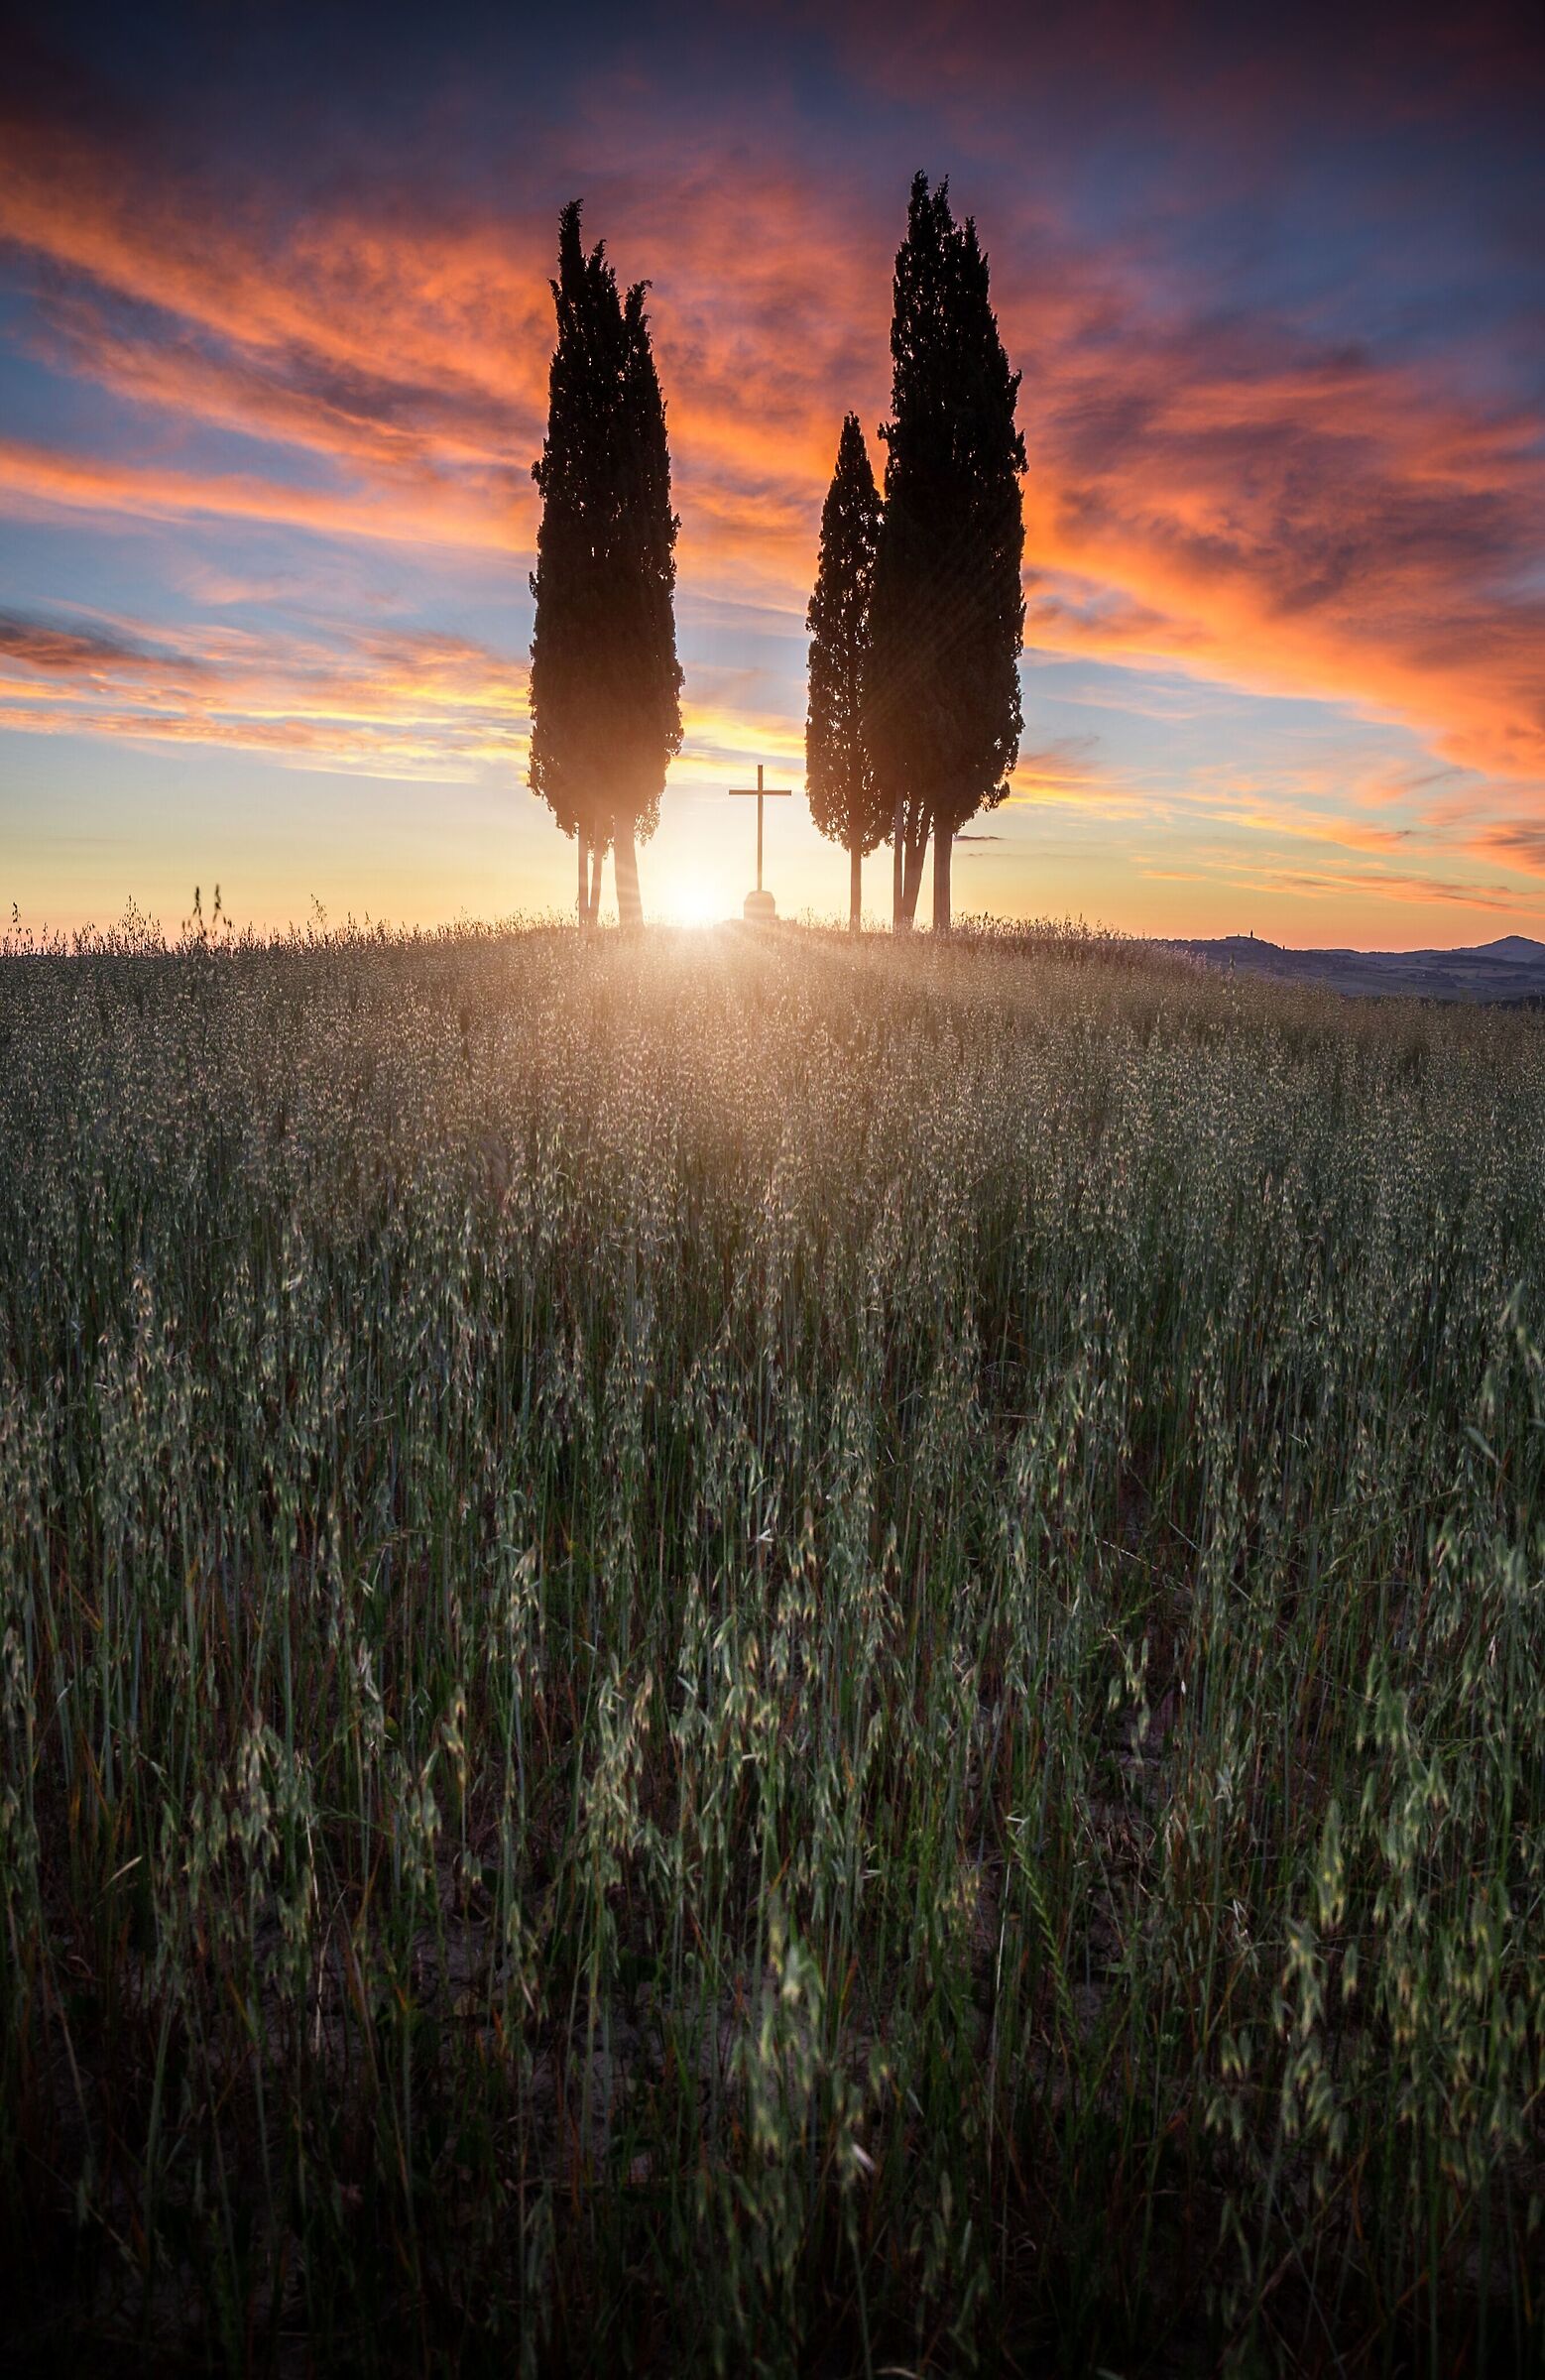 Sunrise in val d'orcia...